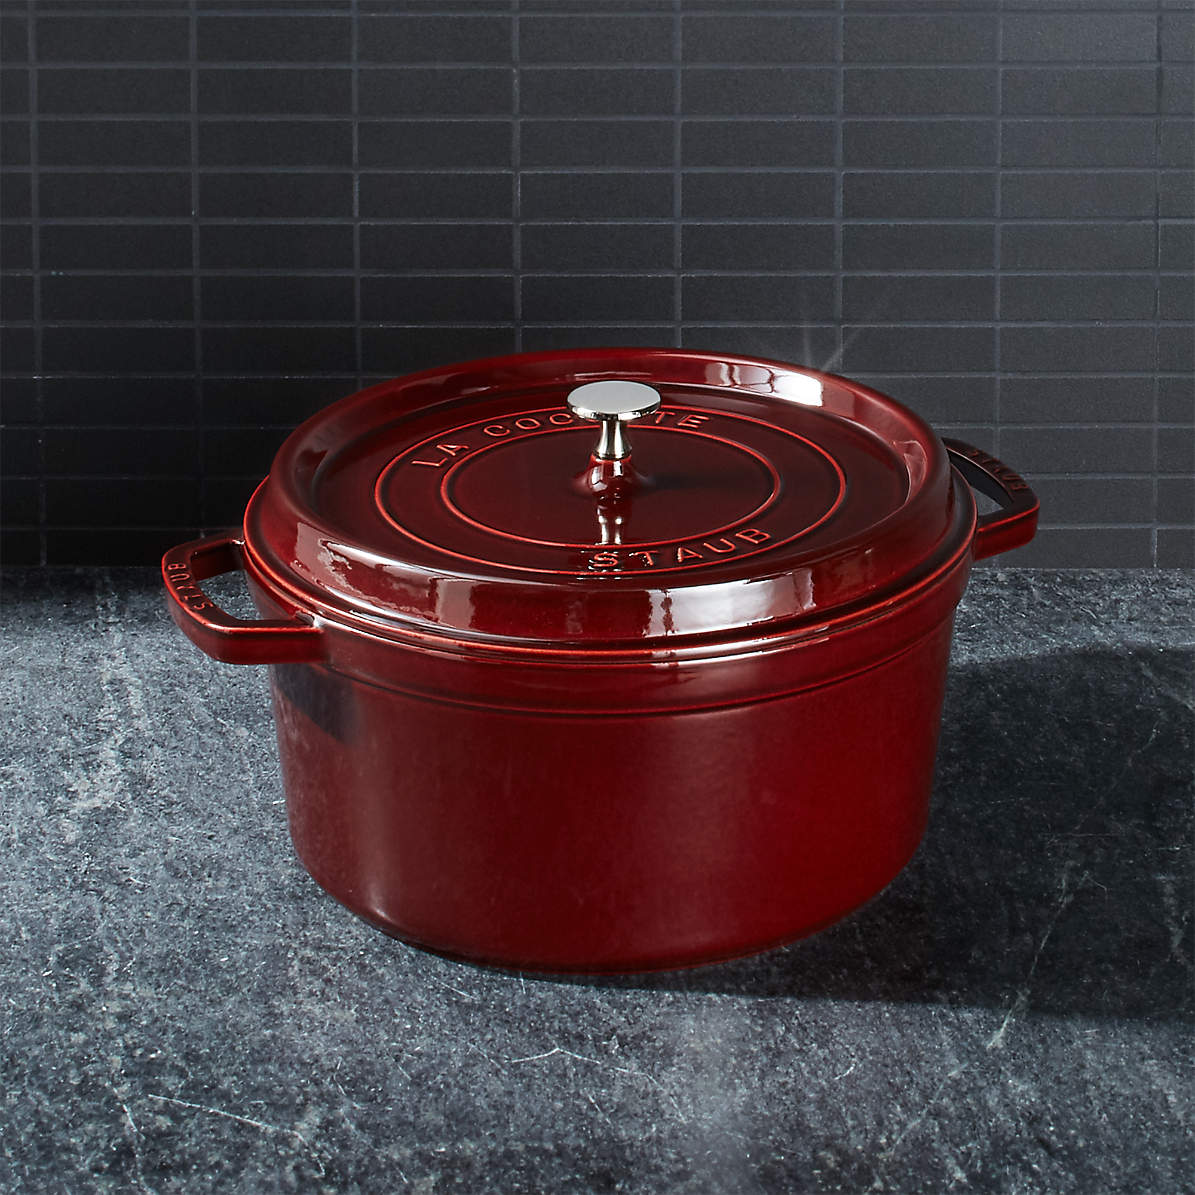  STAUB Cast Iron Dutch Oven 7-qt Round Cocotte, Made in